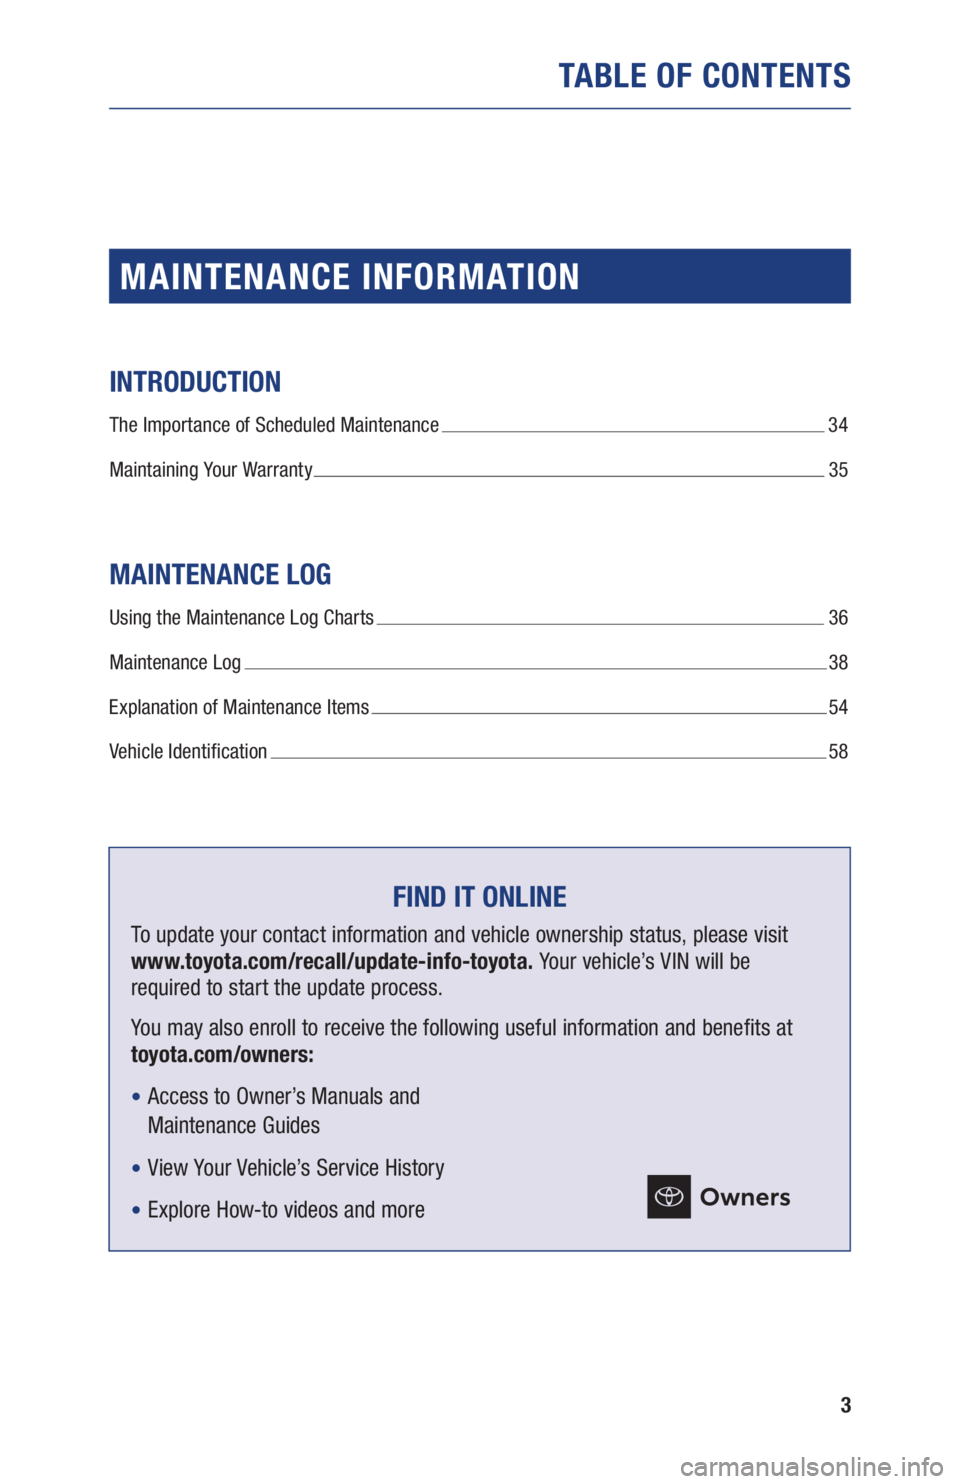 TOYOTA AVALON 2021  Warranties & Maintenance Guides (in English) 3
TABLE OF CONTENTS
MAINTENANCE INFORMATION
INTRODUCTION
The Importance of Scheduled Maintenance  34
Maintaining Your Warranty 
  35
MAINTENANCE LOG
Using the Maintenance Log Charts   36
Maintenance L